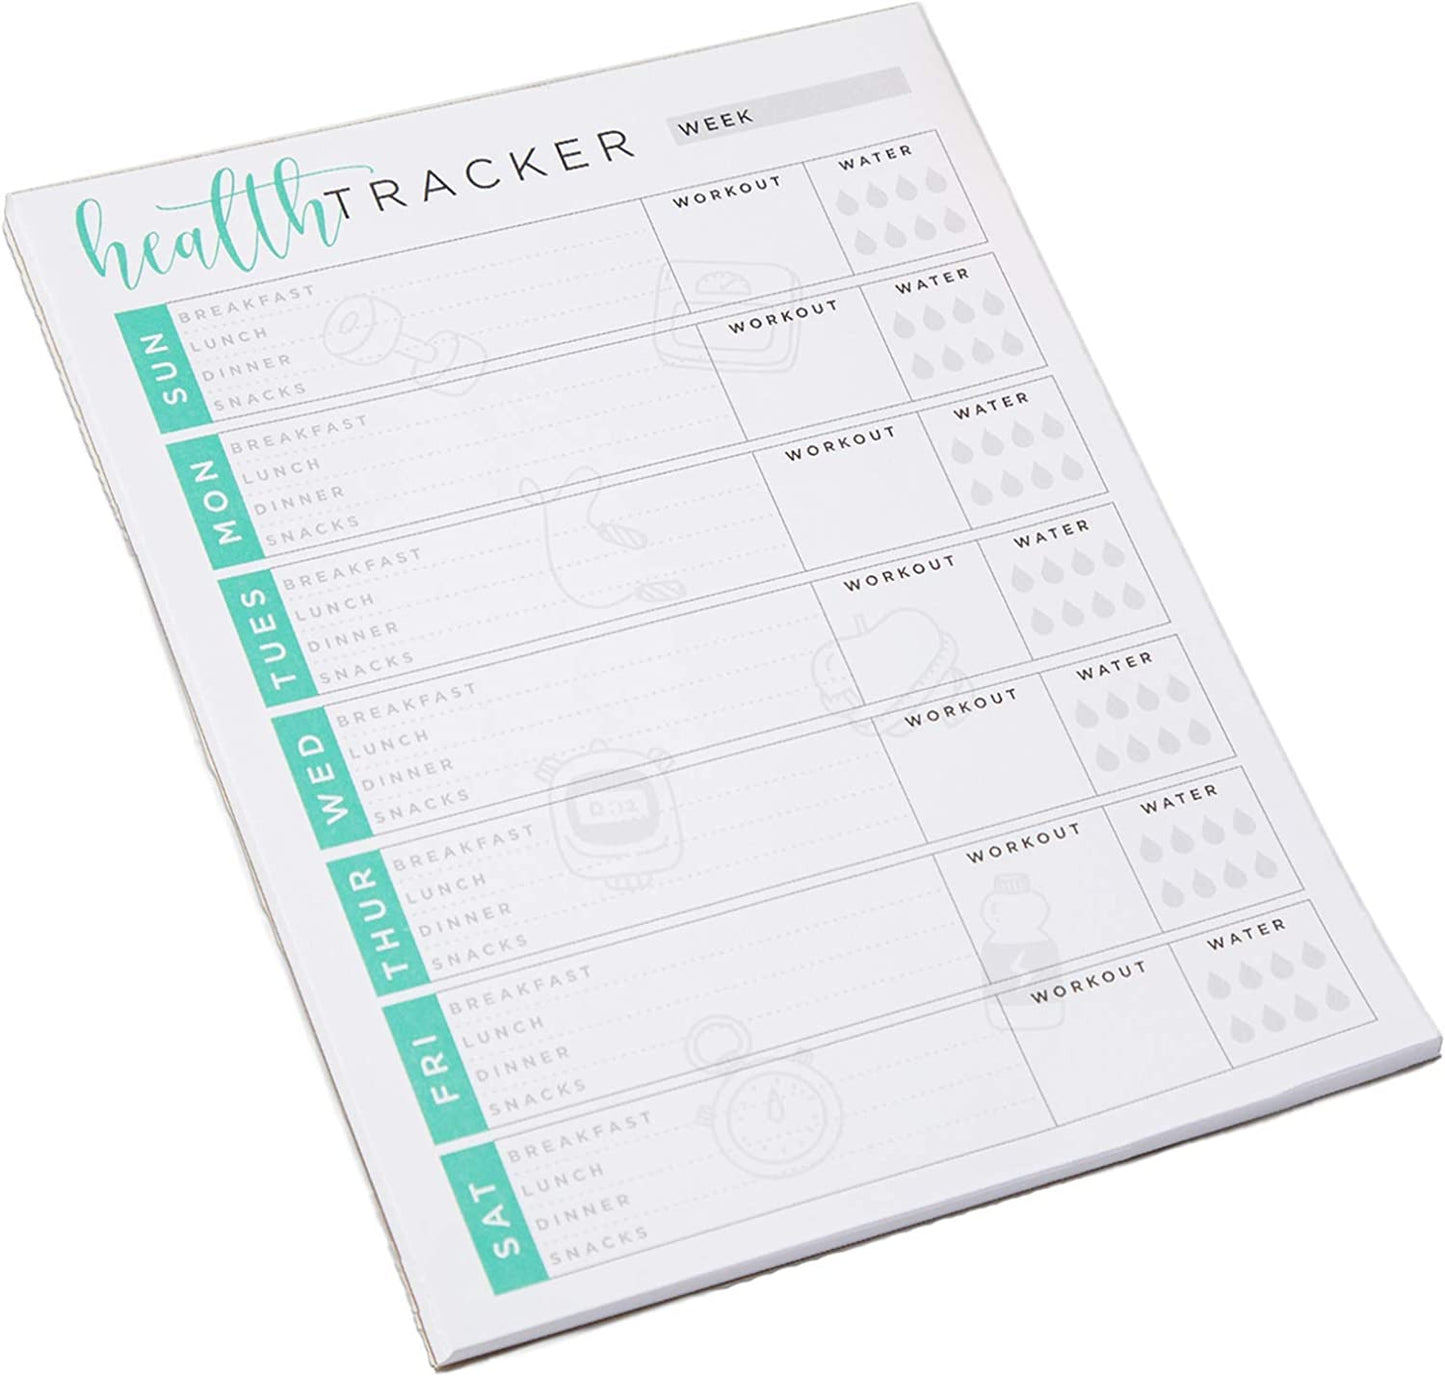 Weekly Health & Wellness Tracker Journal Exercise Planner